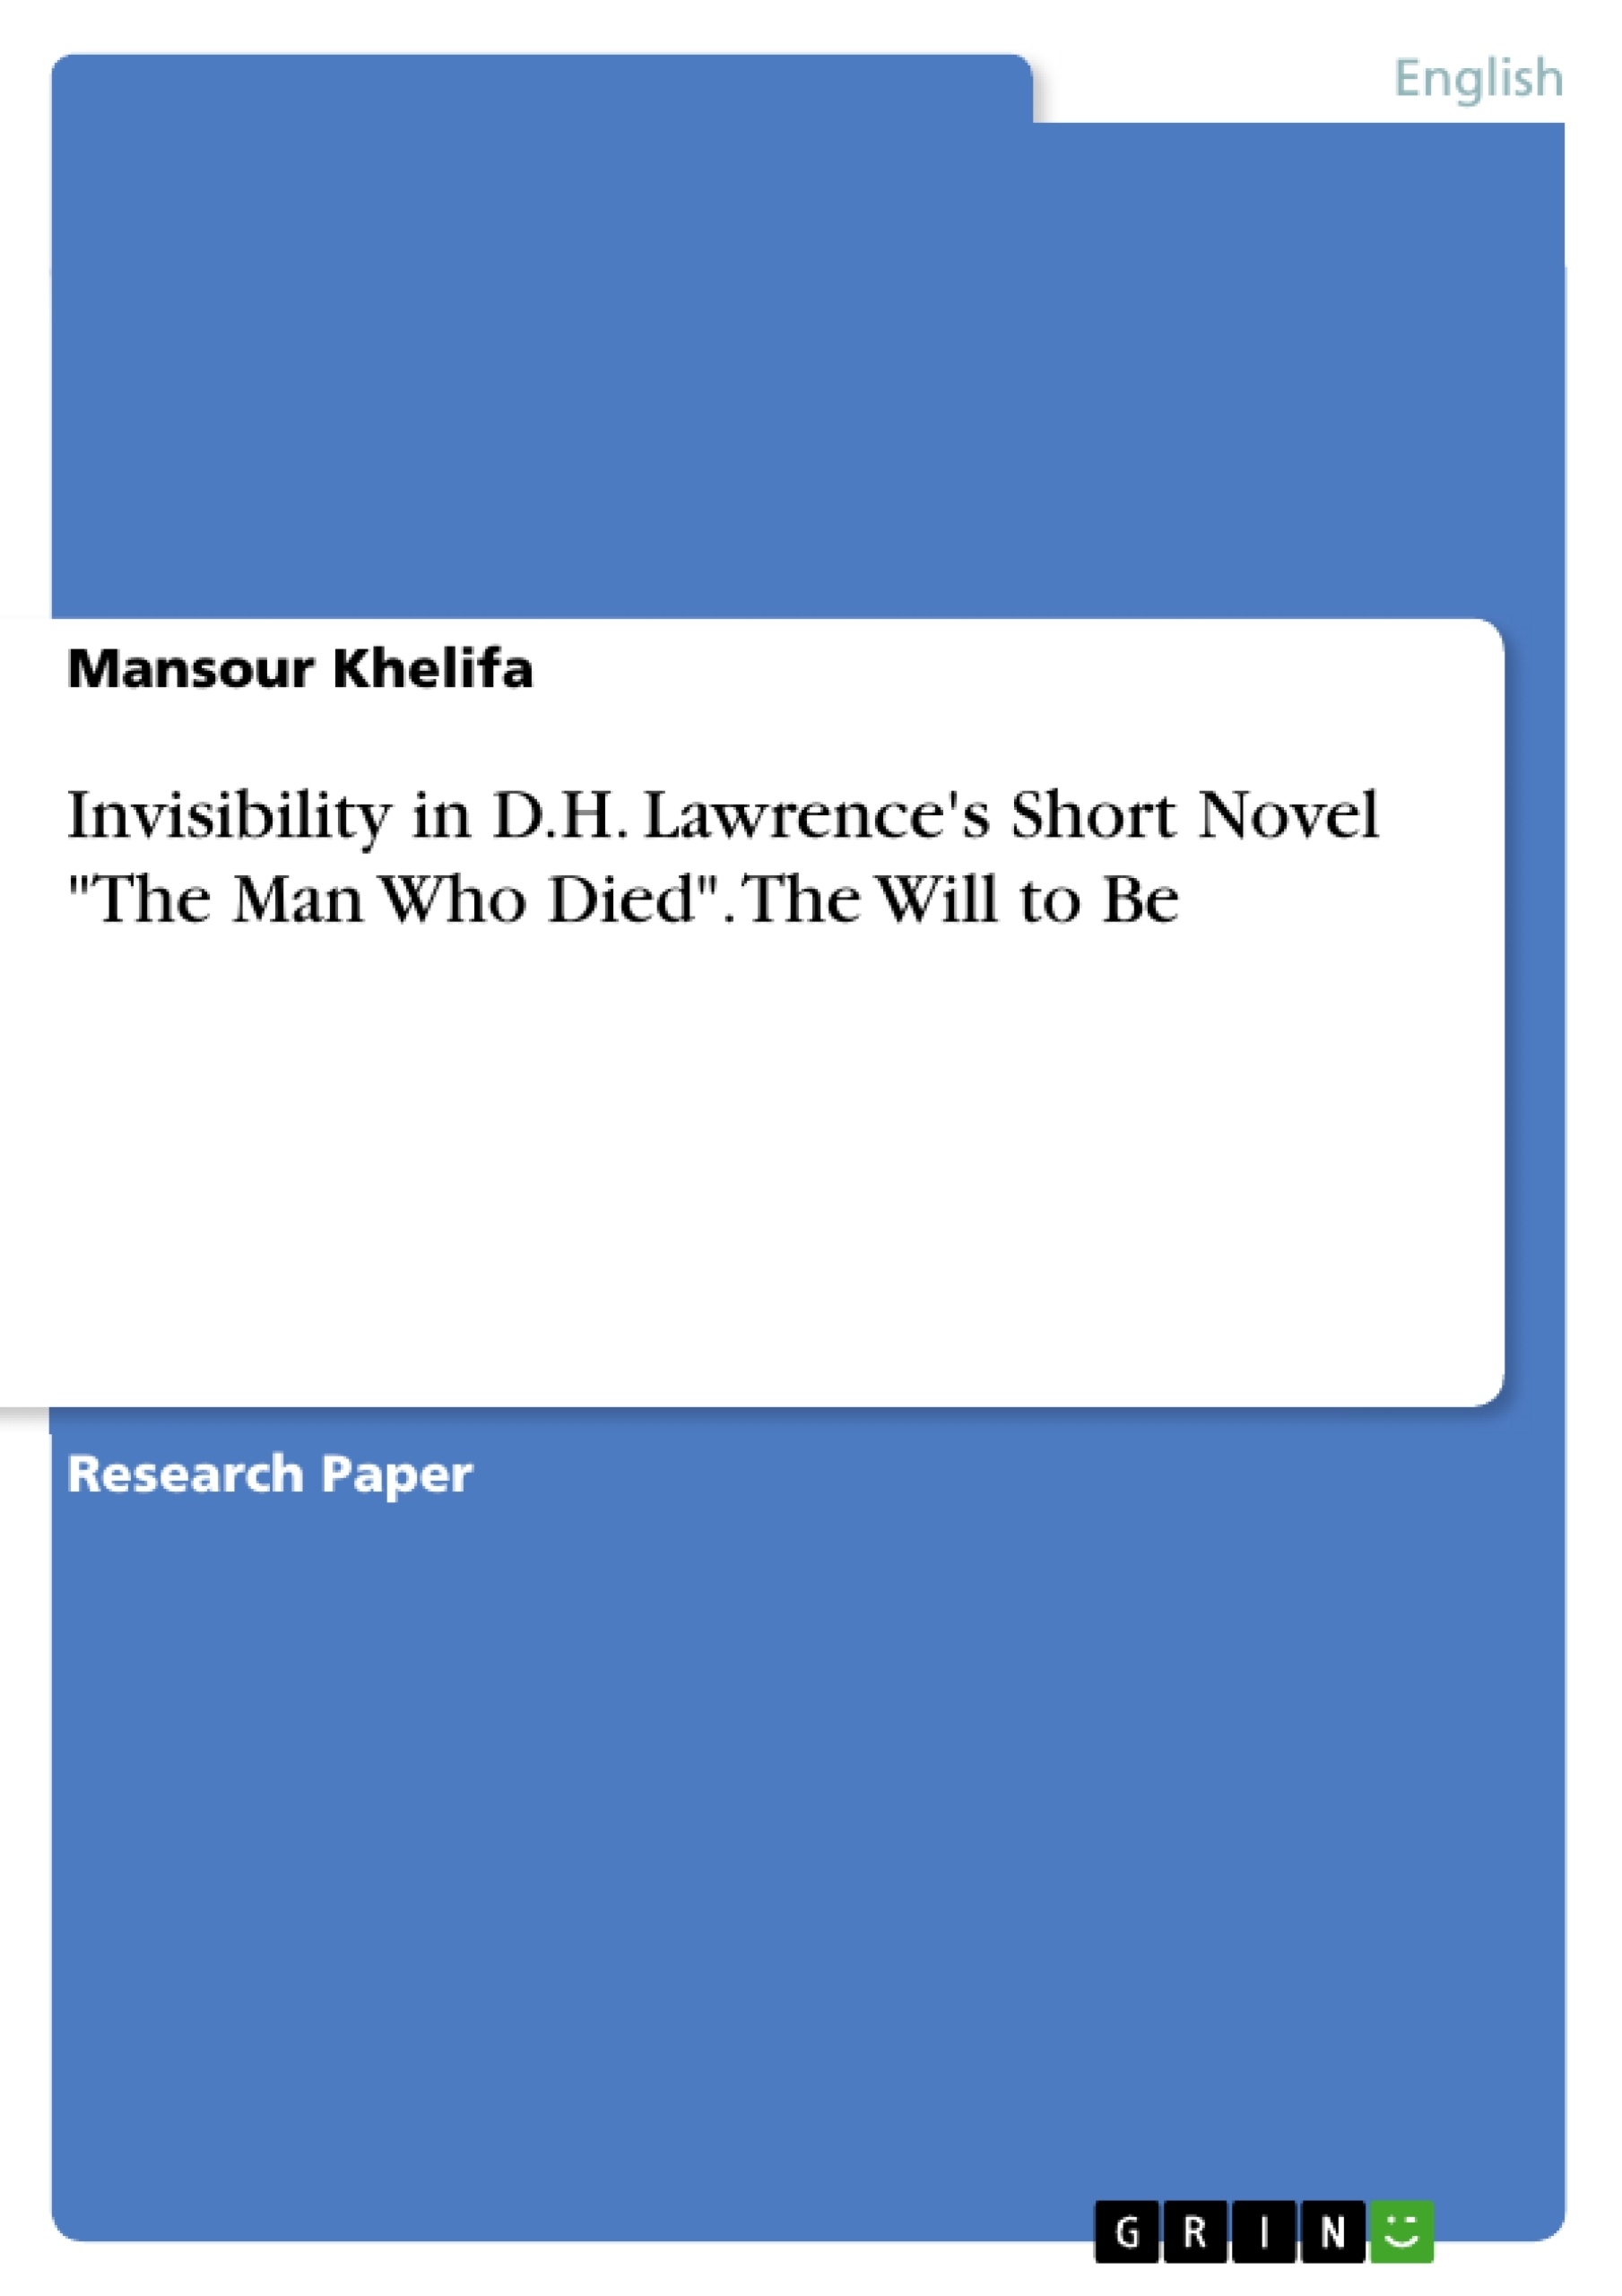 Titel: Invisibility in D.H. Lawrence's Short Novel "The Man Who Died". The Will to Be